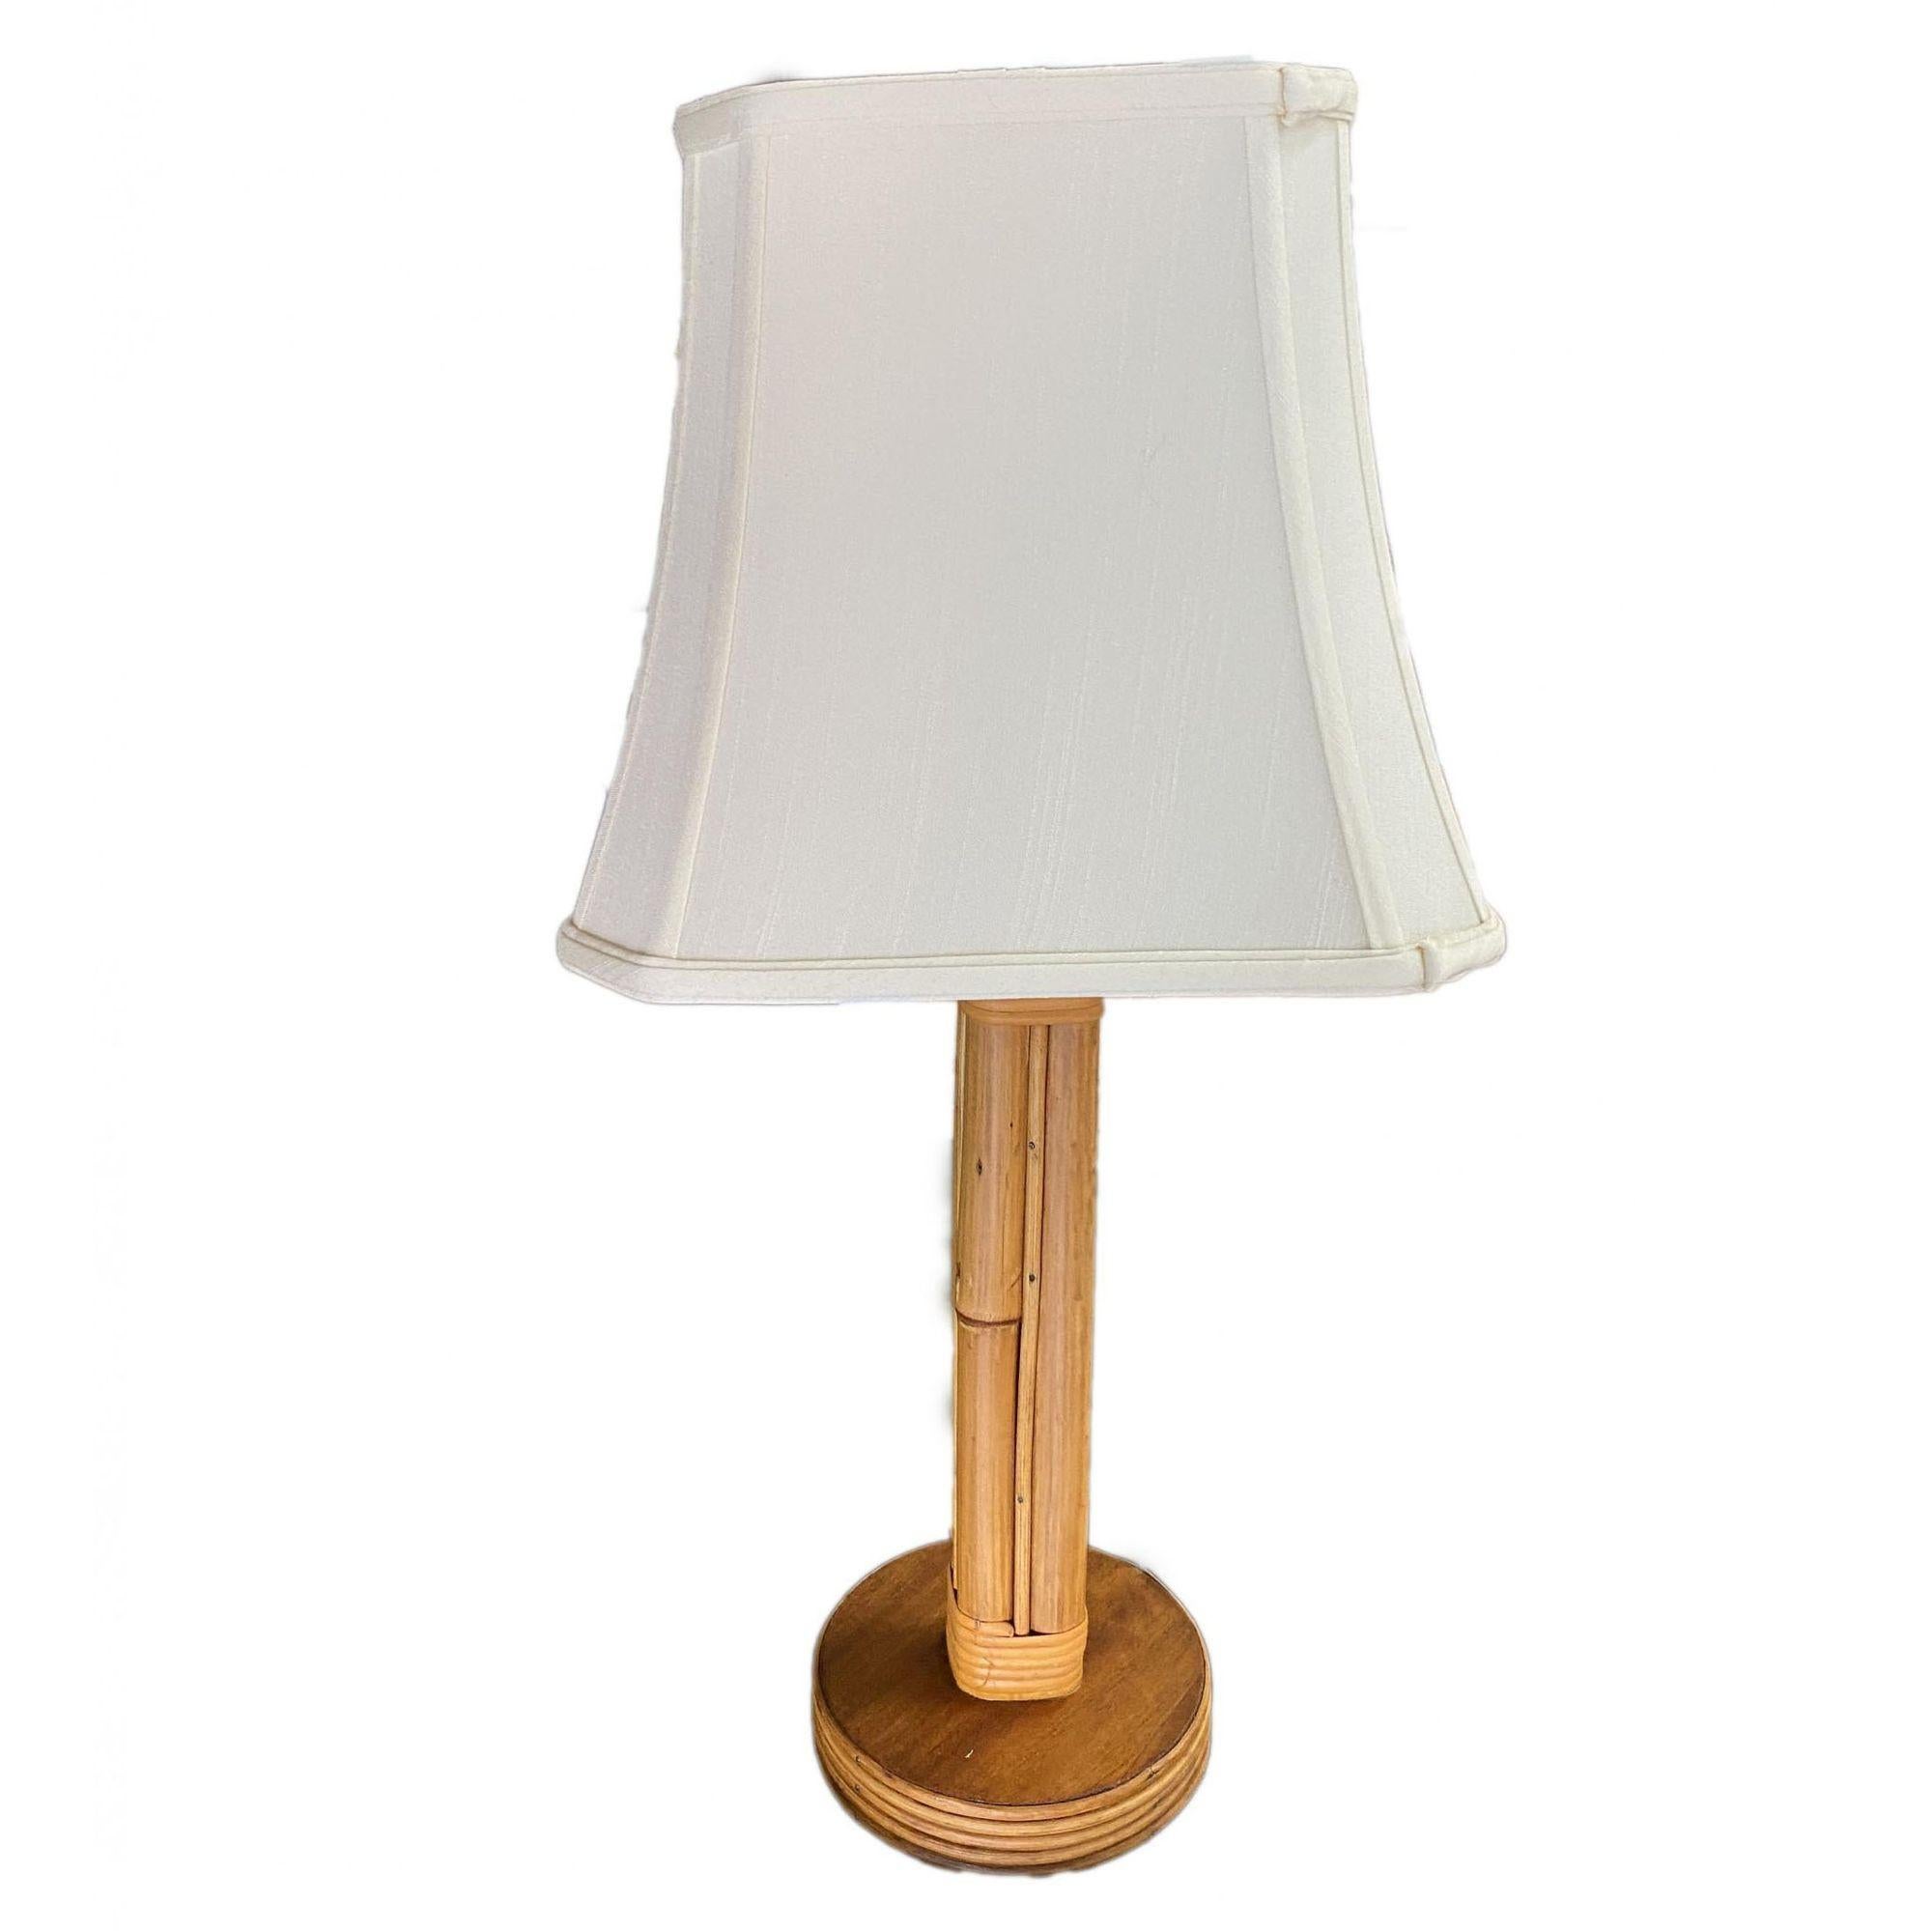 Restored mid-century rattan table lamp featuring six decorative rattan poles fixed to a round brass base with fancy wrappings, circa 1950.

Measures: 7